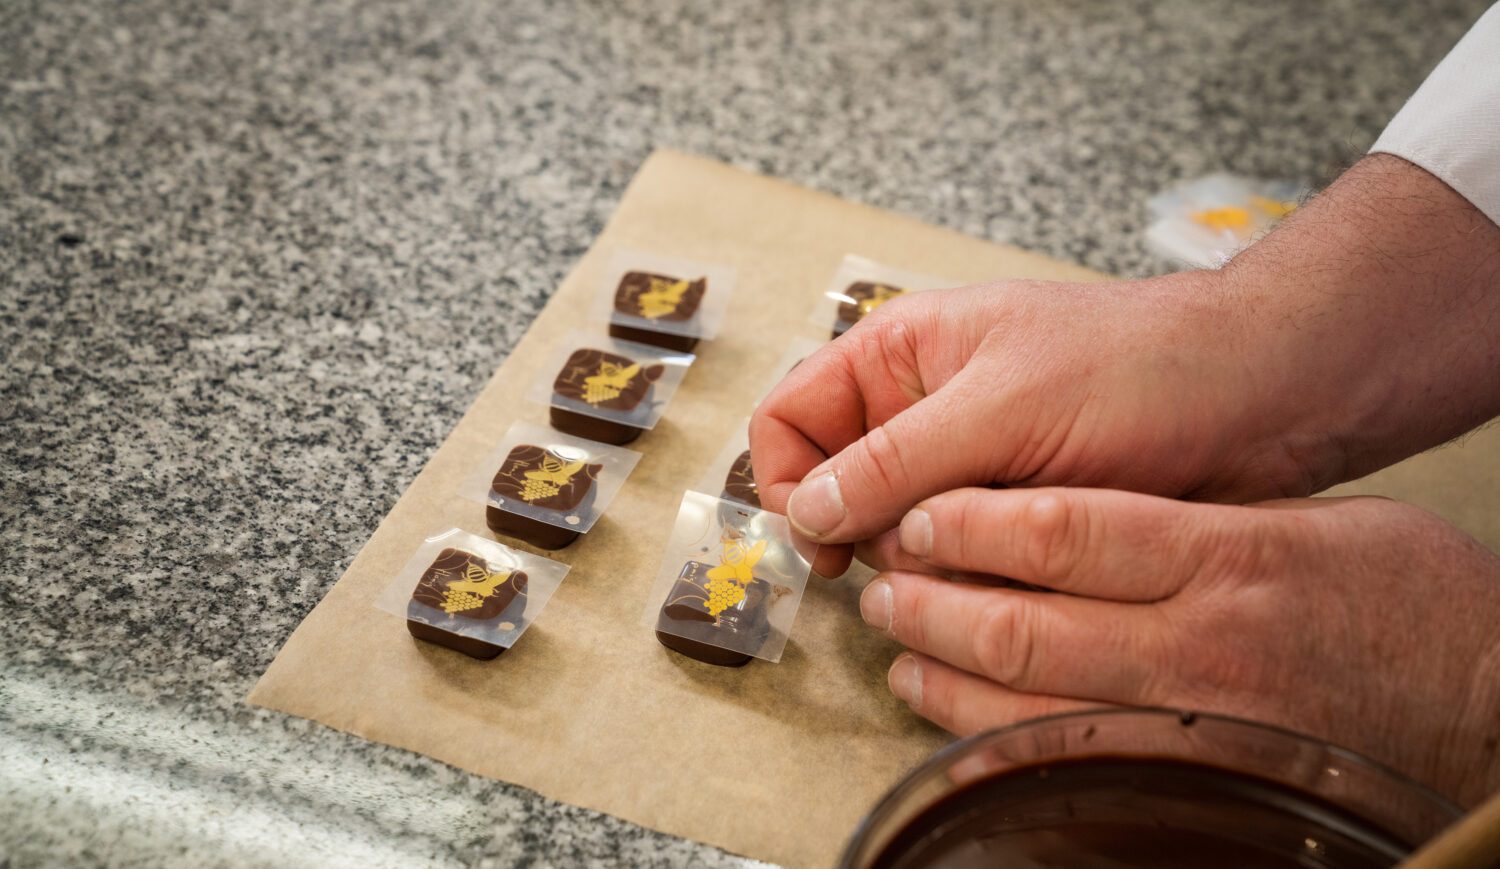 Two hands decorate chocolates